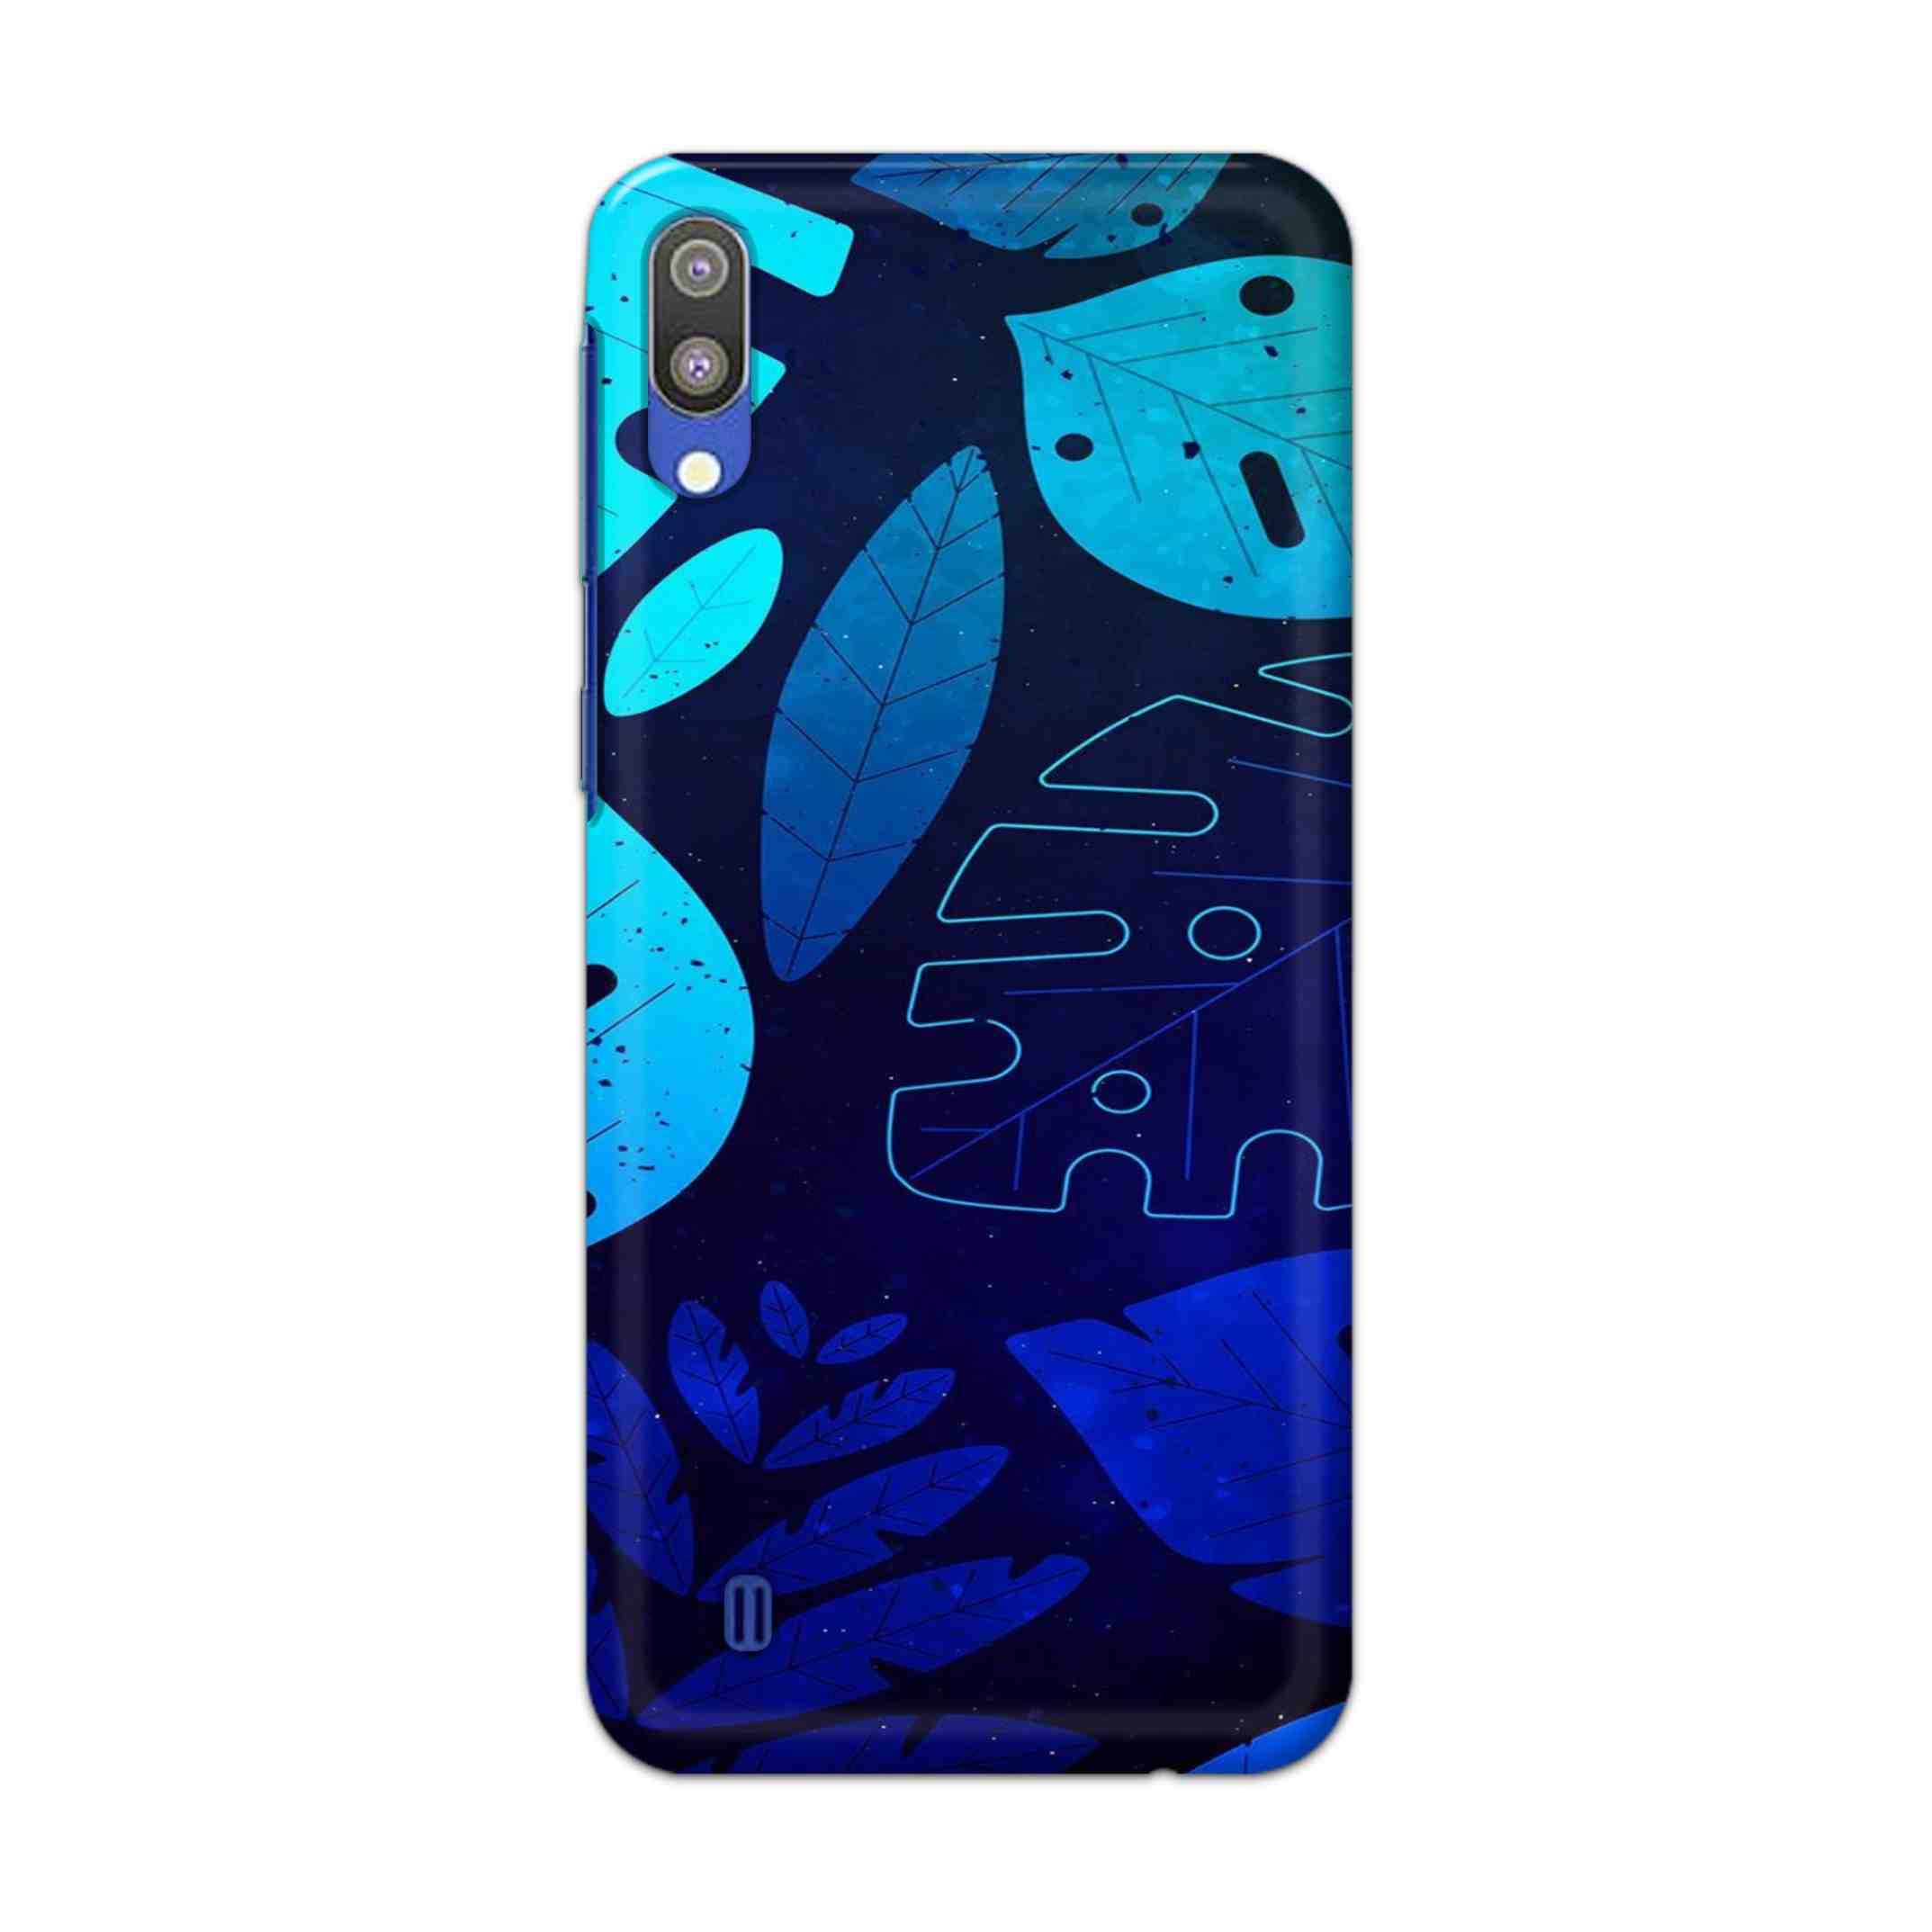 Buy Neon Leaf Hard Back Mobile Phone Case Cover For Samsung Galaxy M10 Online